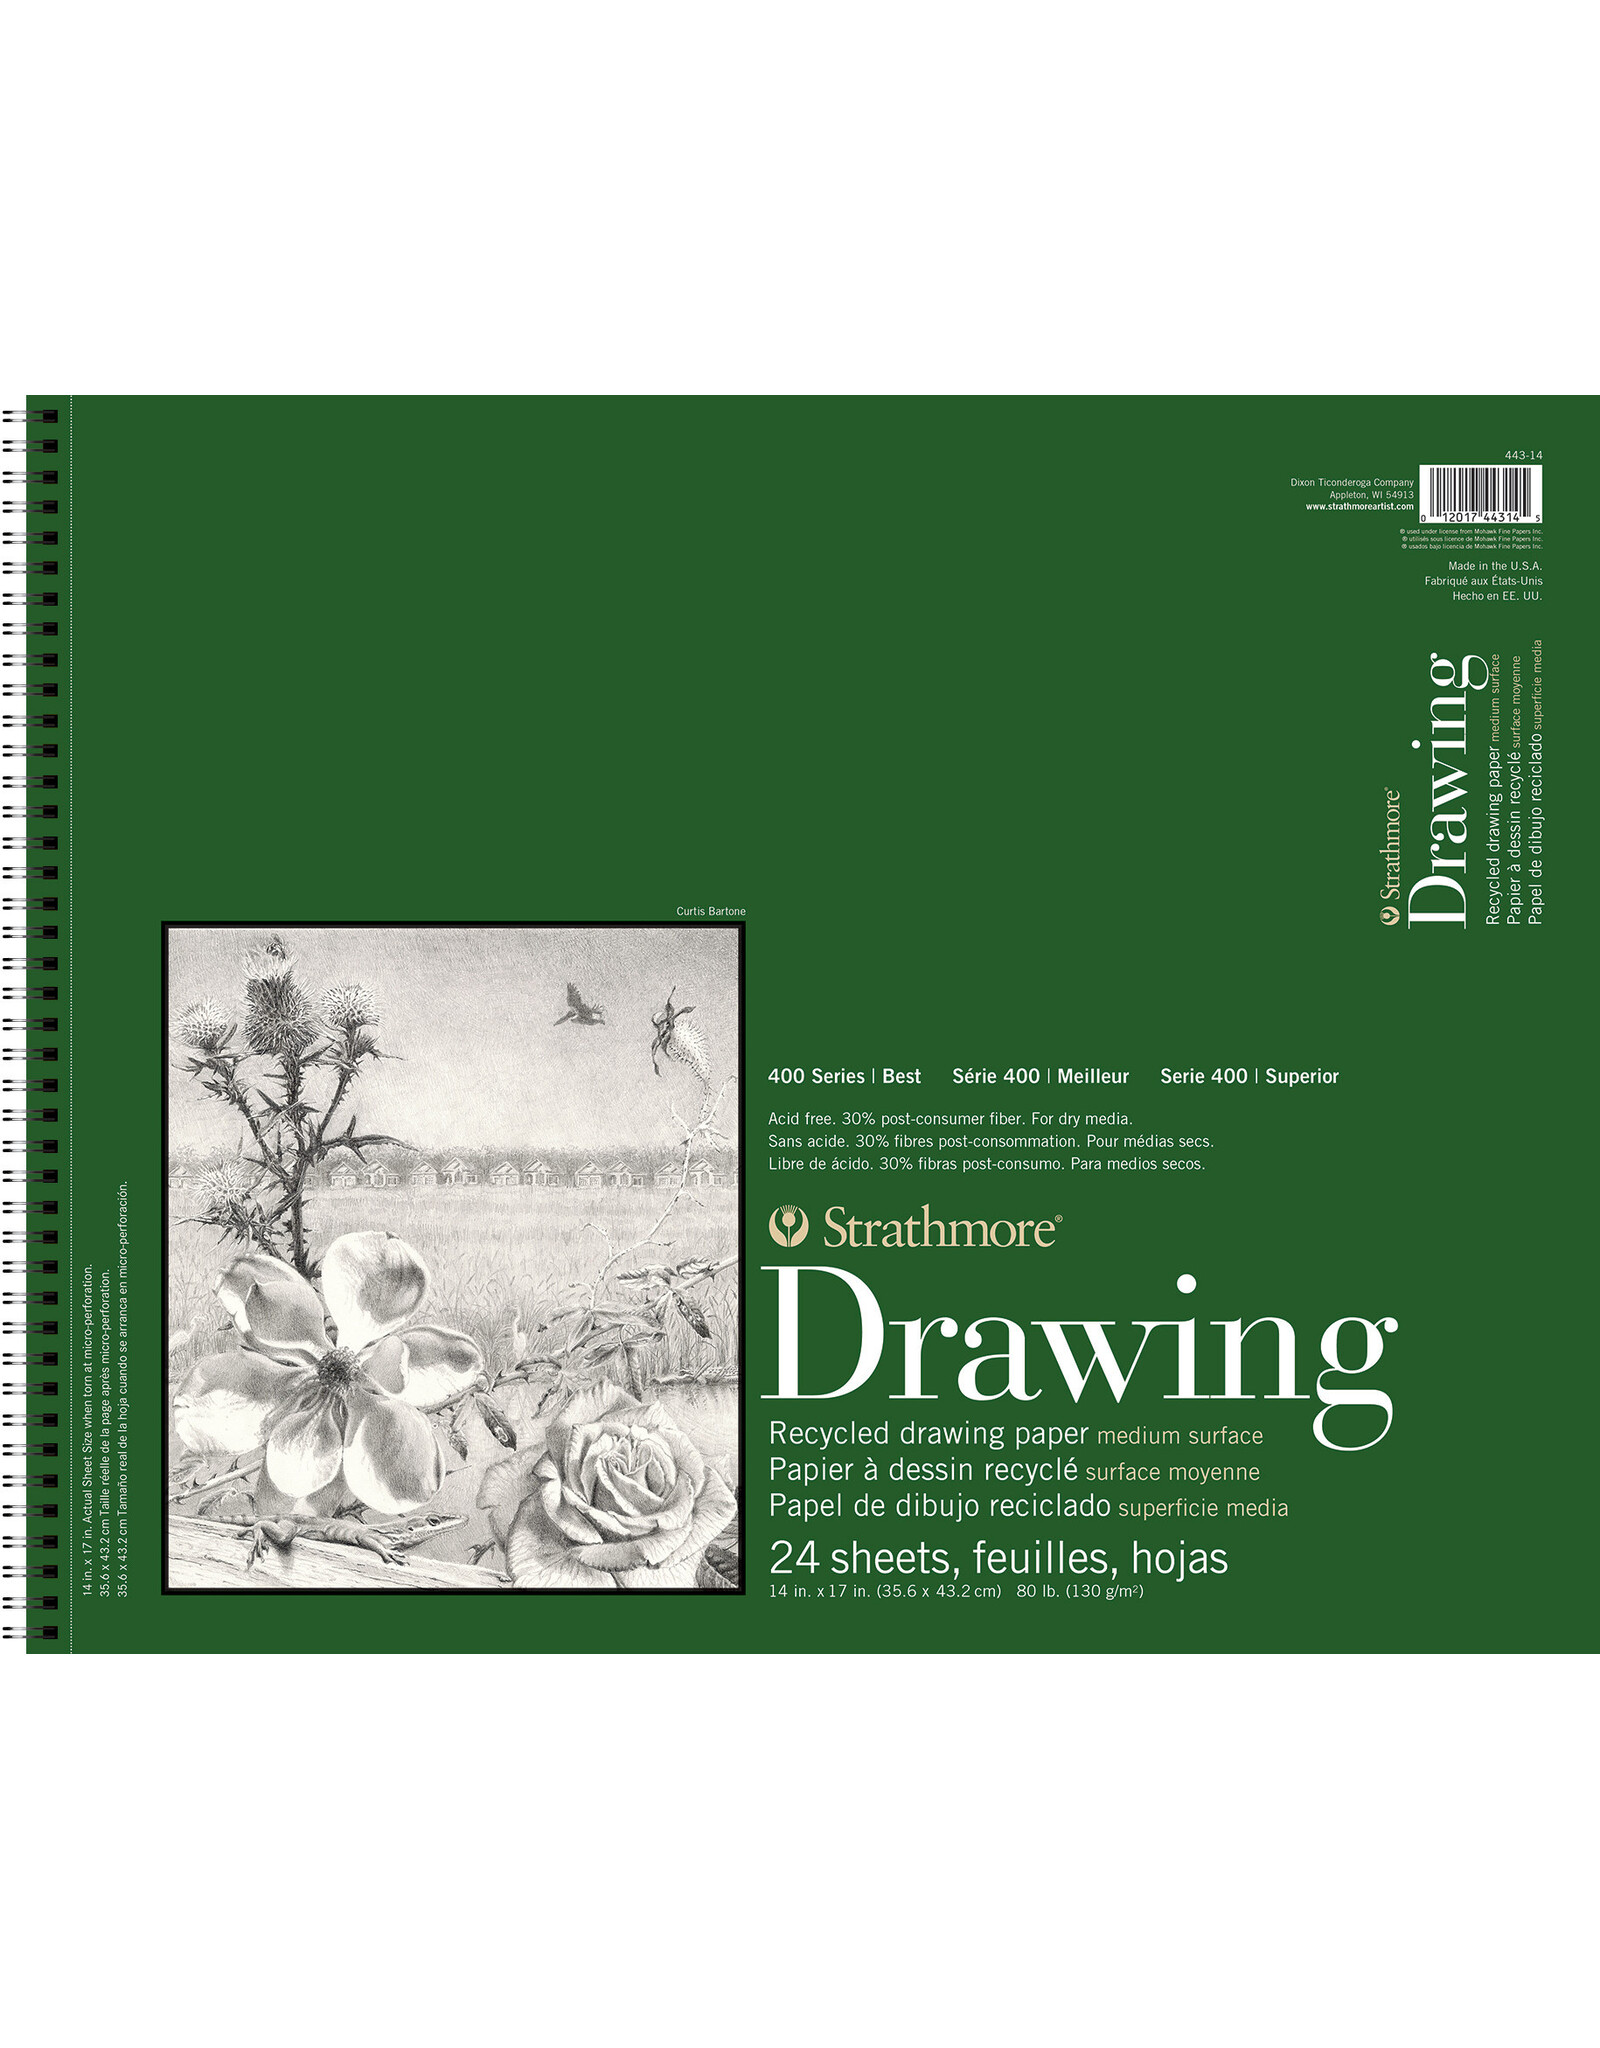 Strathmore Strathmore 400 Series Recycled Drawing Paper Pad, 24 Sheets, 14” x 17”